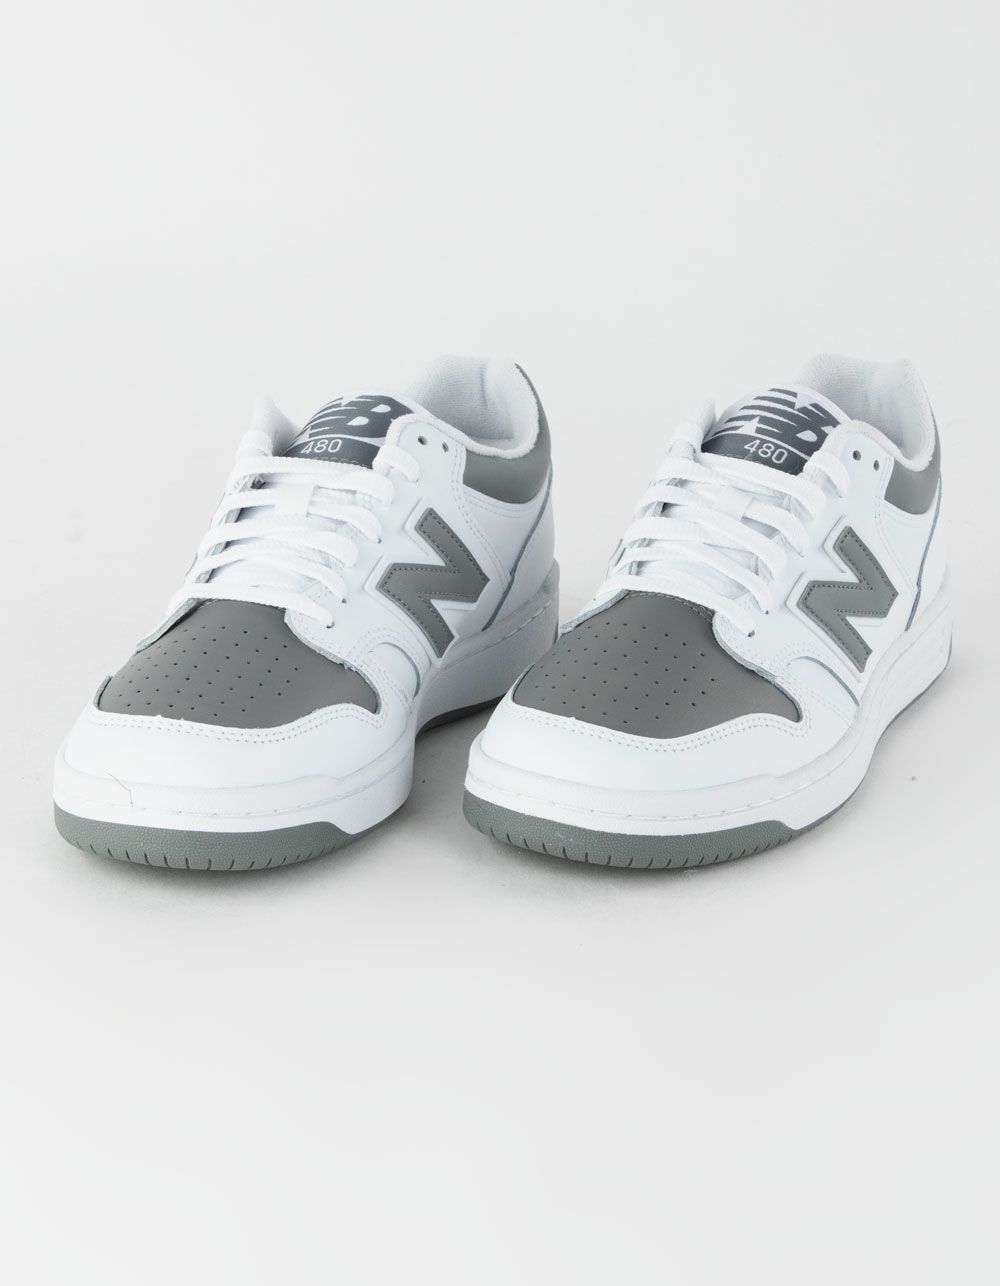 NEW BALANCE 480 Mens Shoes - WHT/GRAY | Tillys